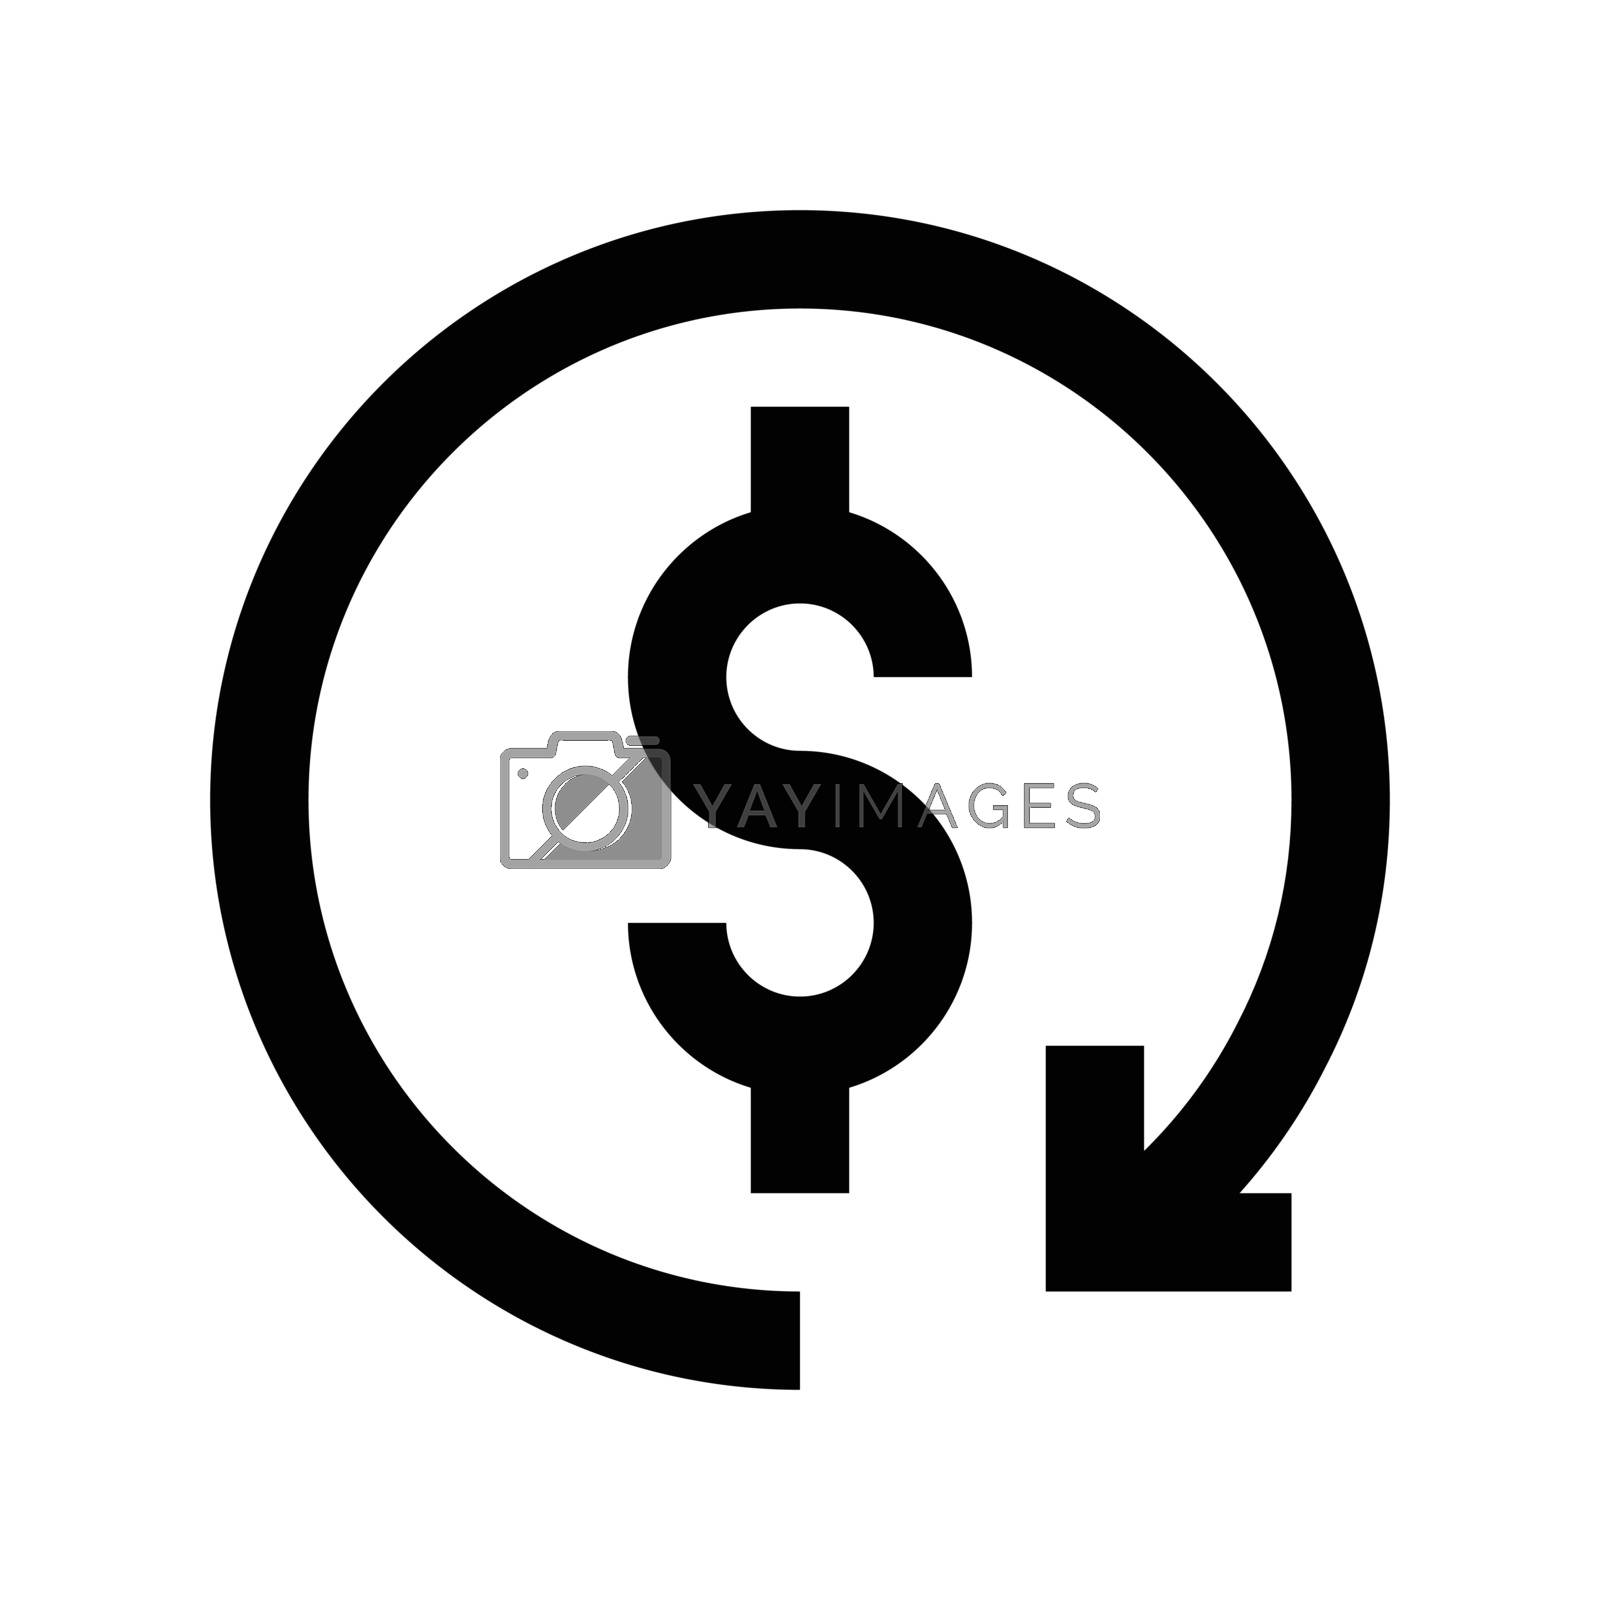 Royalty free image of currency  by vectorstall